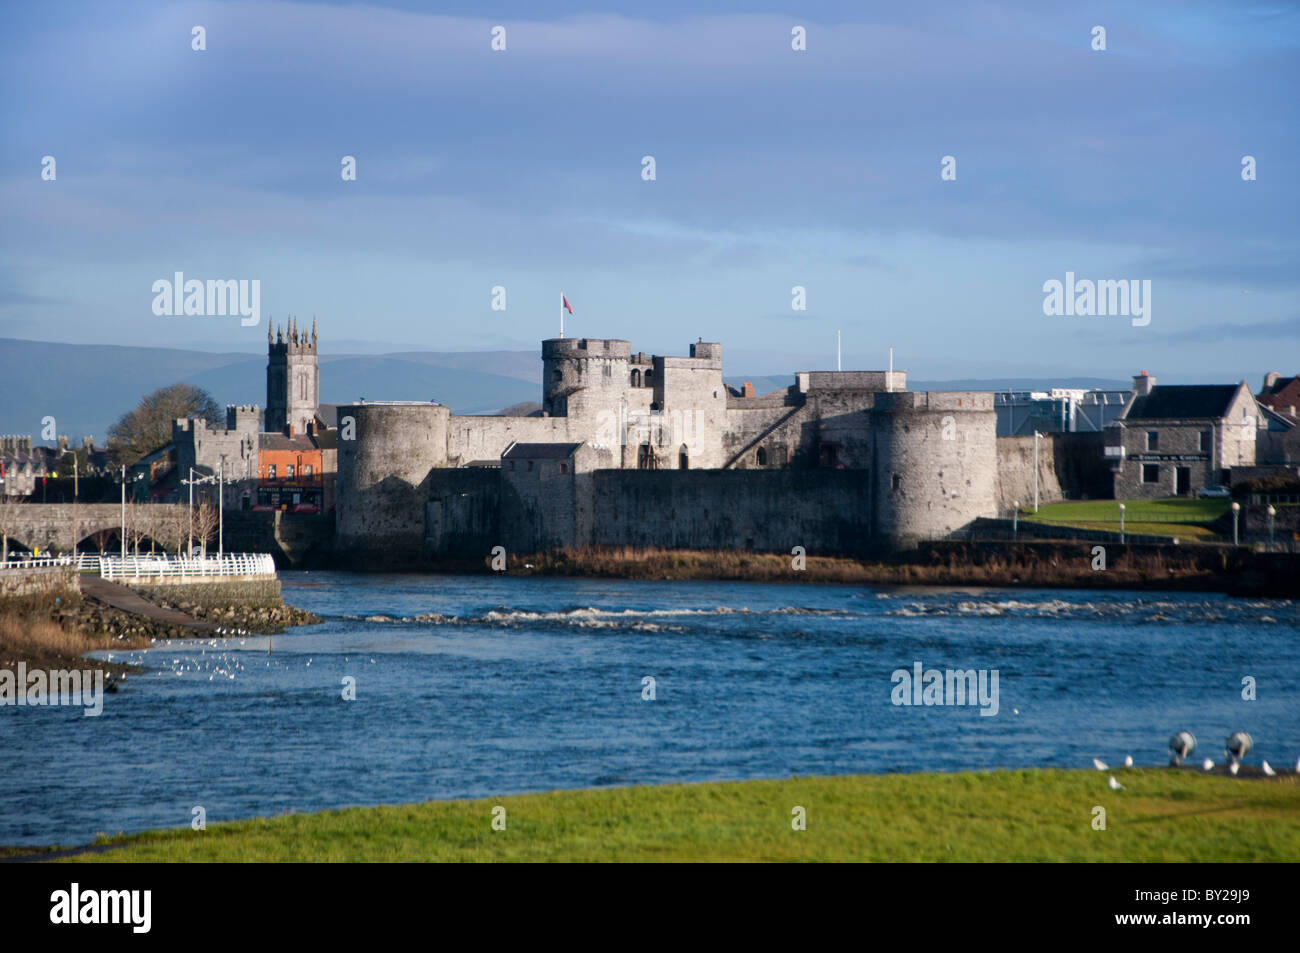 King John's Castle and the River Shannon, Limerick, County Limerick, Munster, Republic of Ireland (Eire) Europe Stock Photo